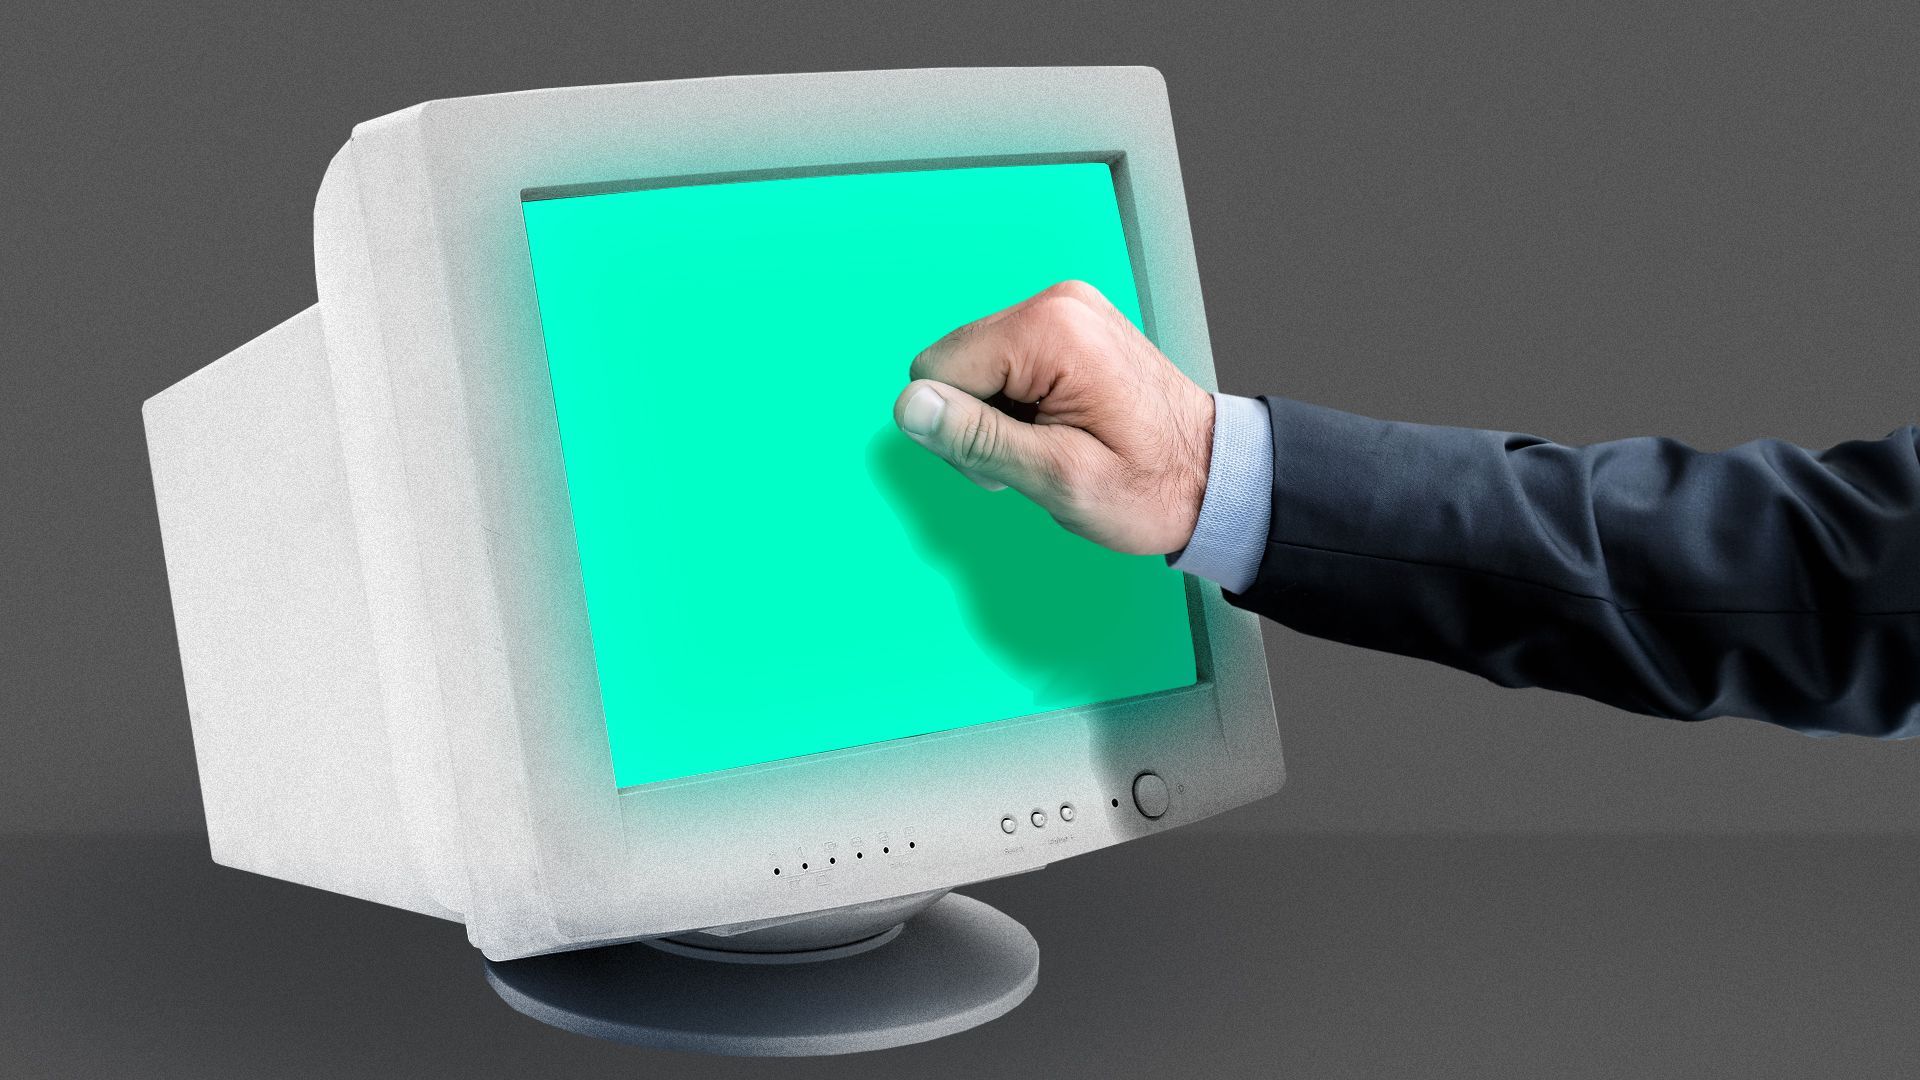 Illustration of a hand knocking on an old computer monitor screen